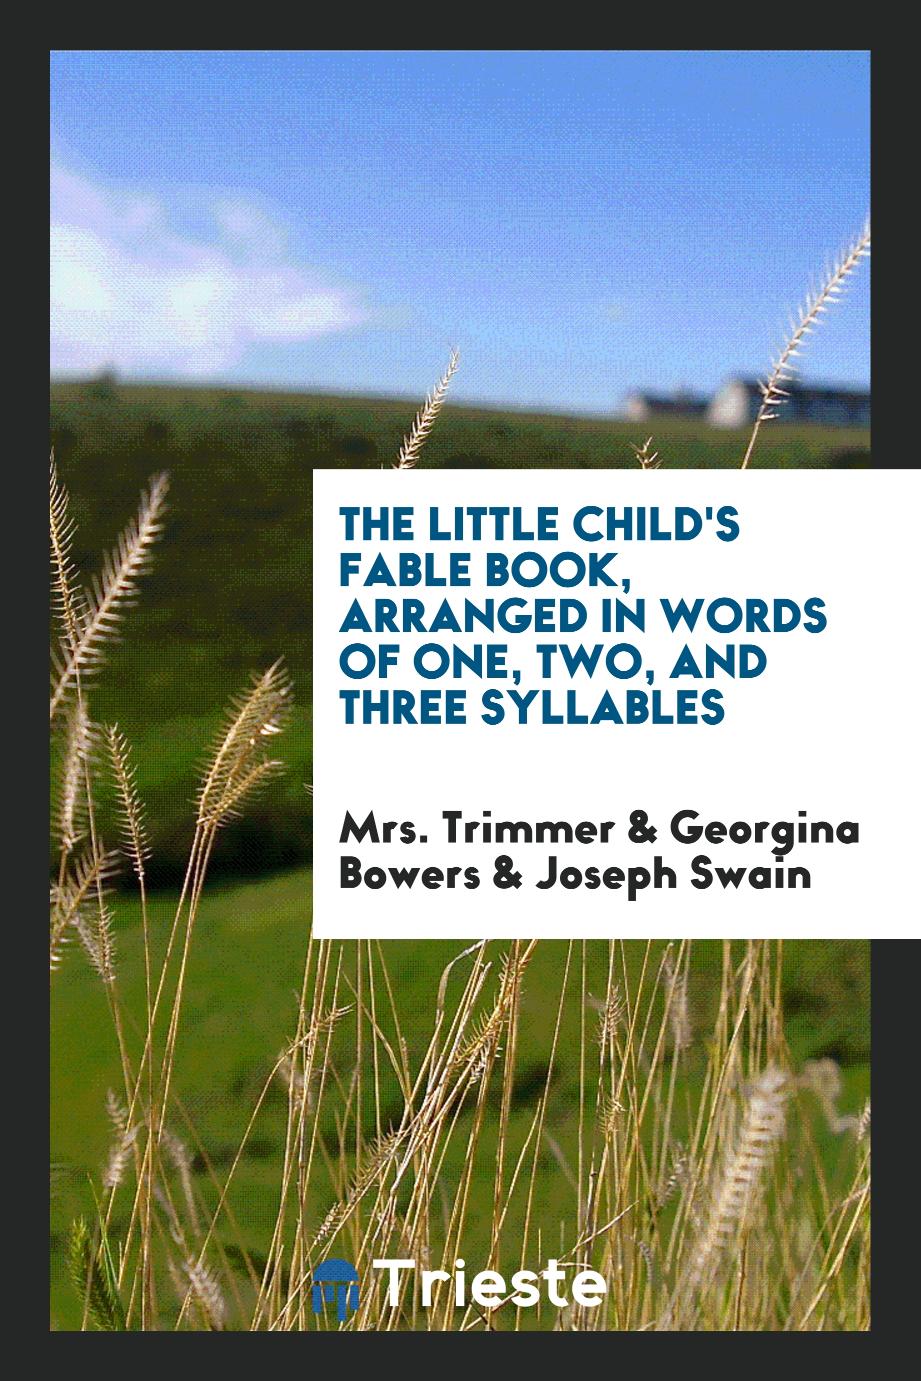 The Little Child's Fable Book, Arranged in Words of One, Two, and Three Syllables